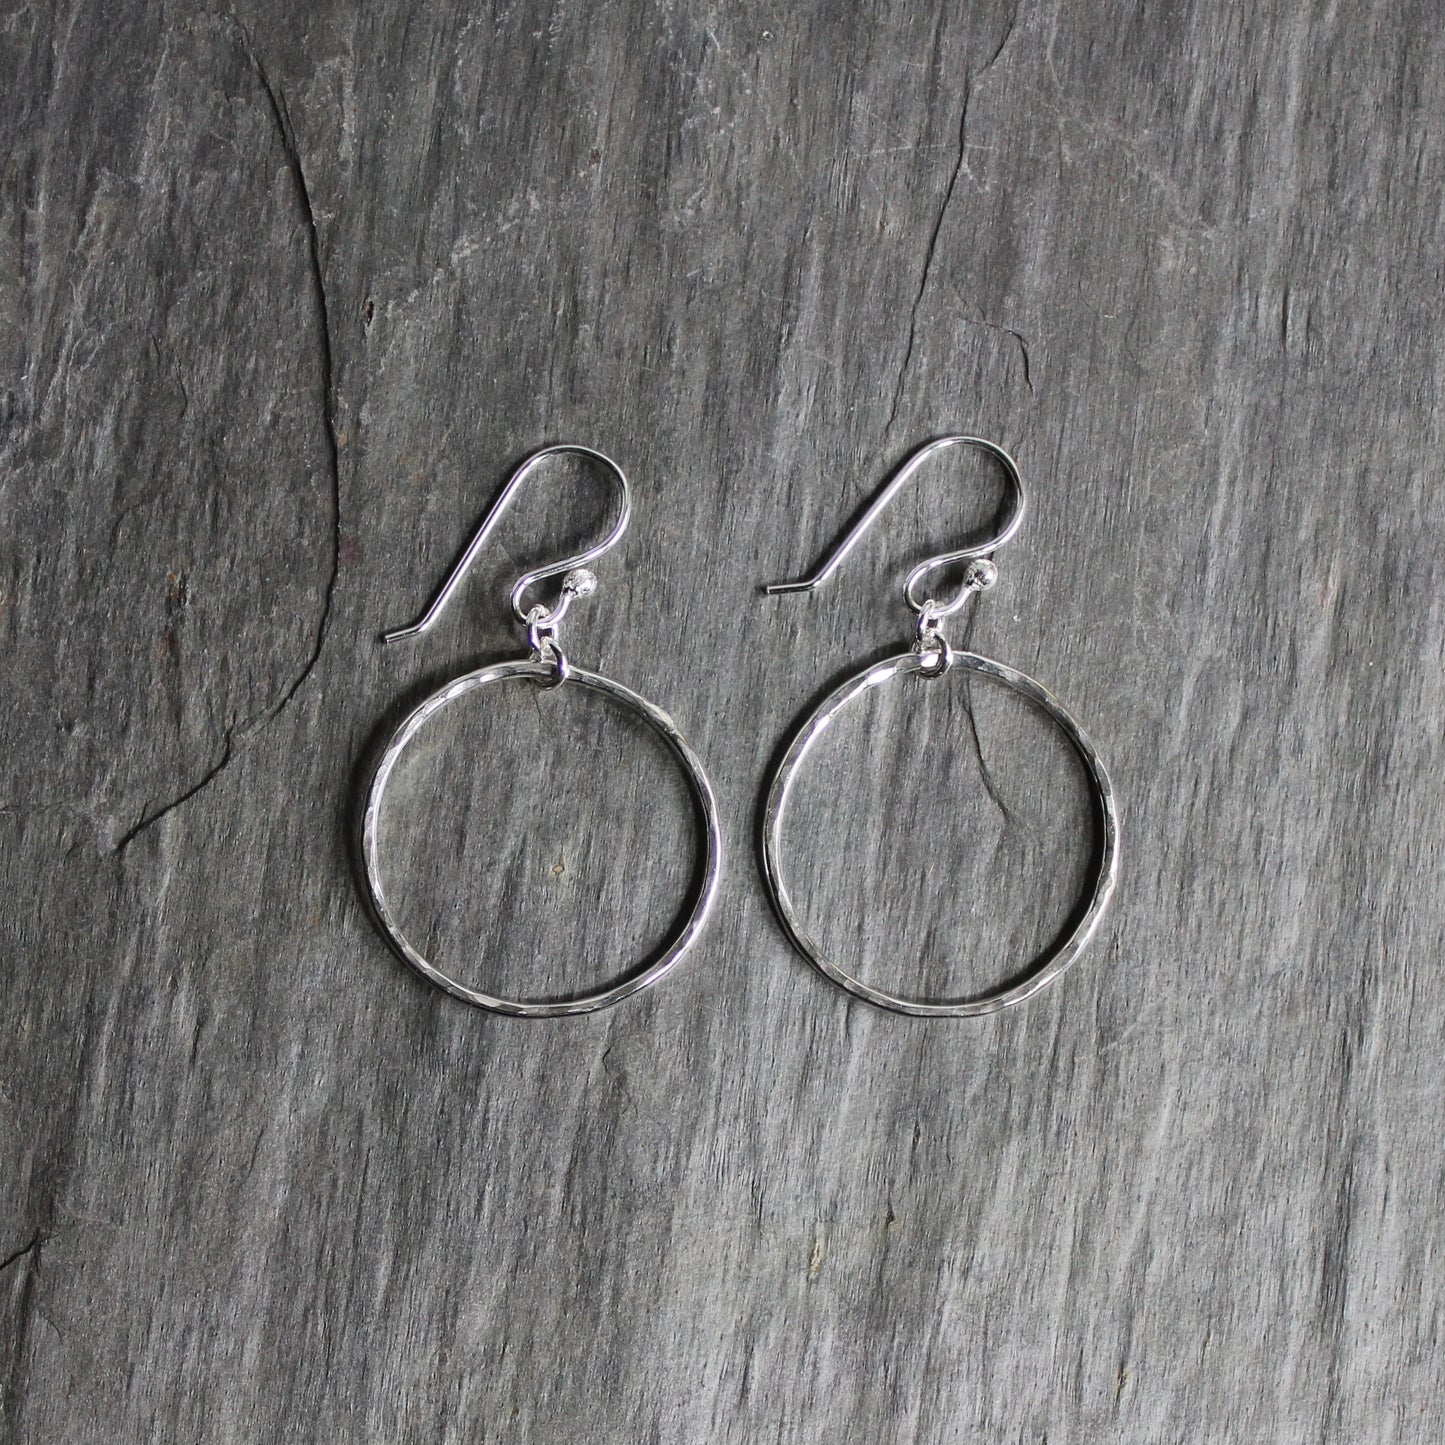 These earrings have 1 inch diameter hammered sterling silver circles attached to handmade ear wires.